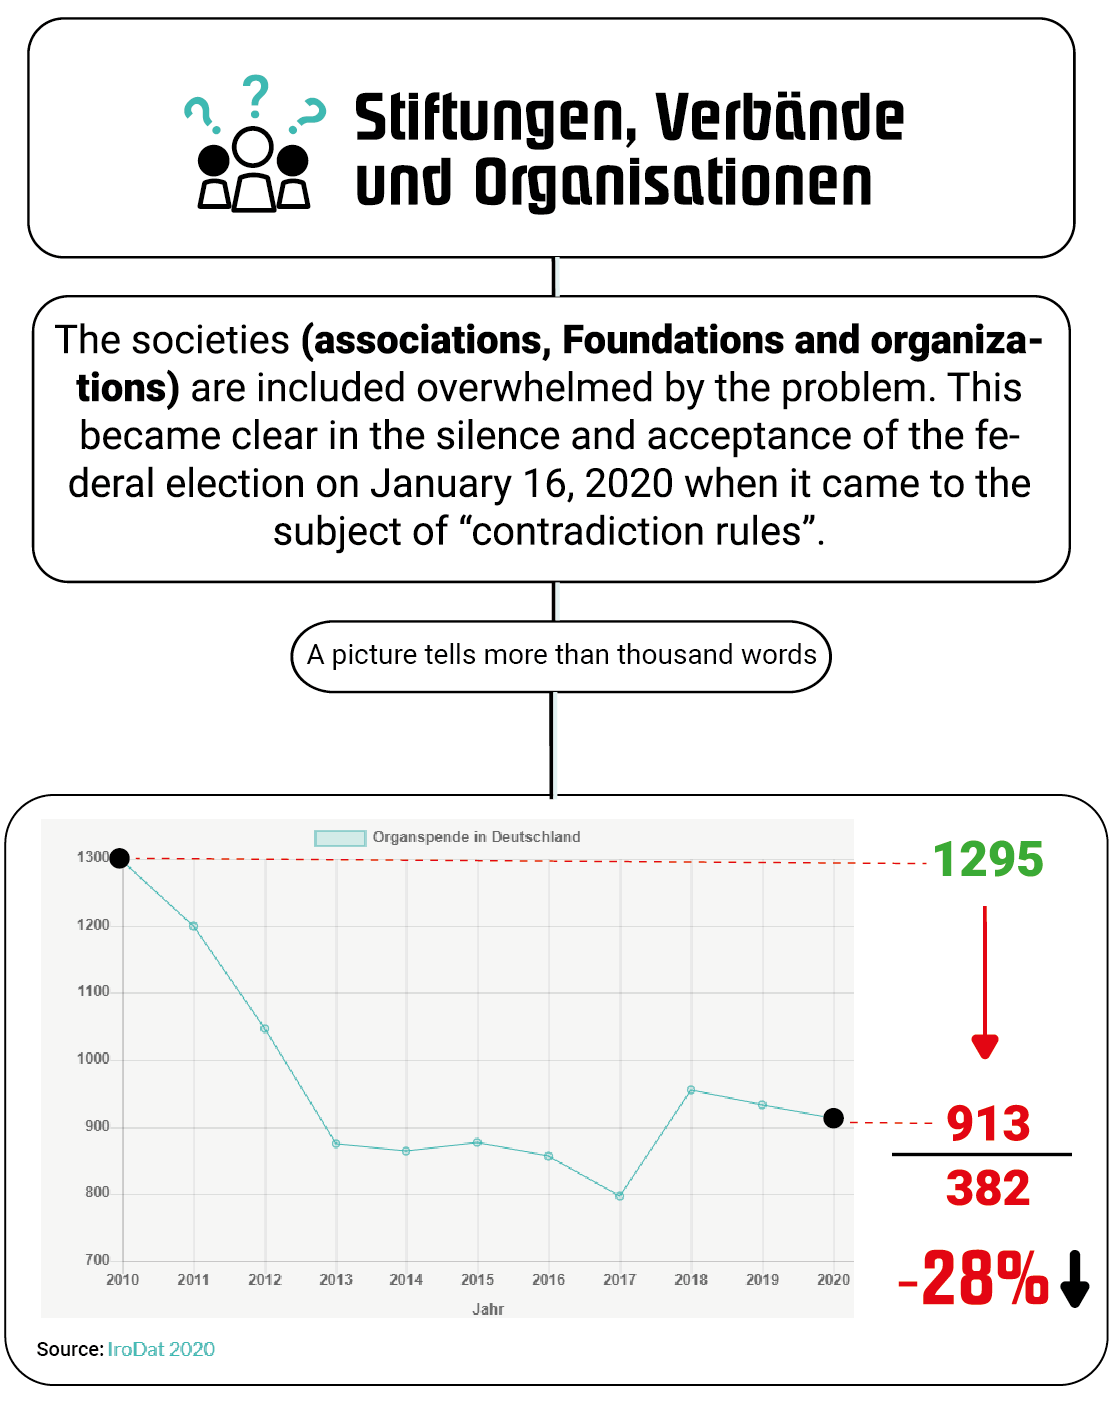 The societies (associations, foundations and organisations) are overwhelmed by the problem. This was clearly made clear by the silence and acceptance of these companies in the Bundestag election on the subject of “opt-in regulation“.